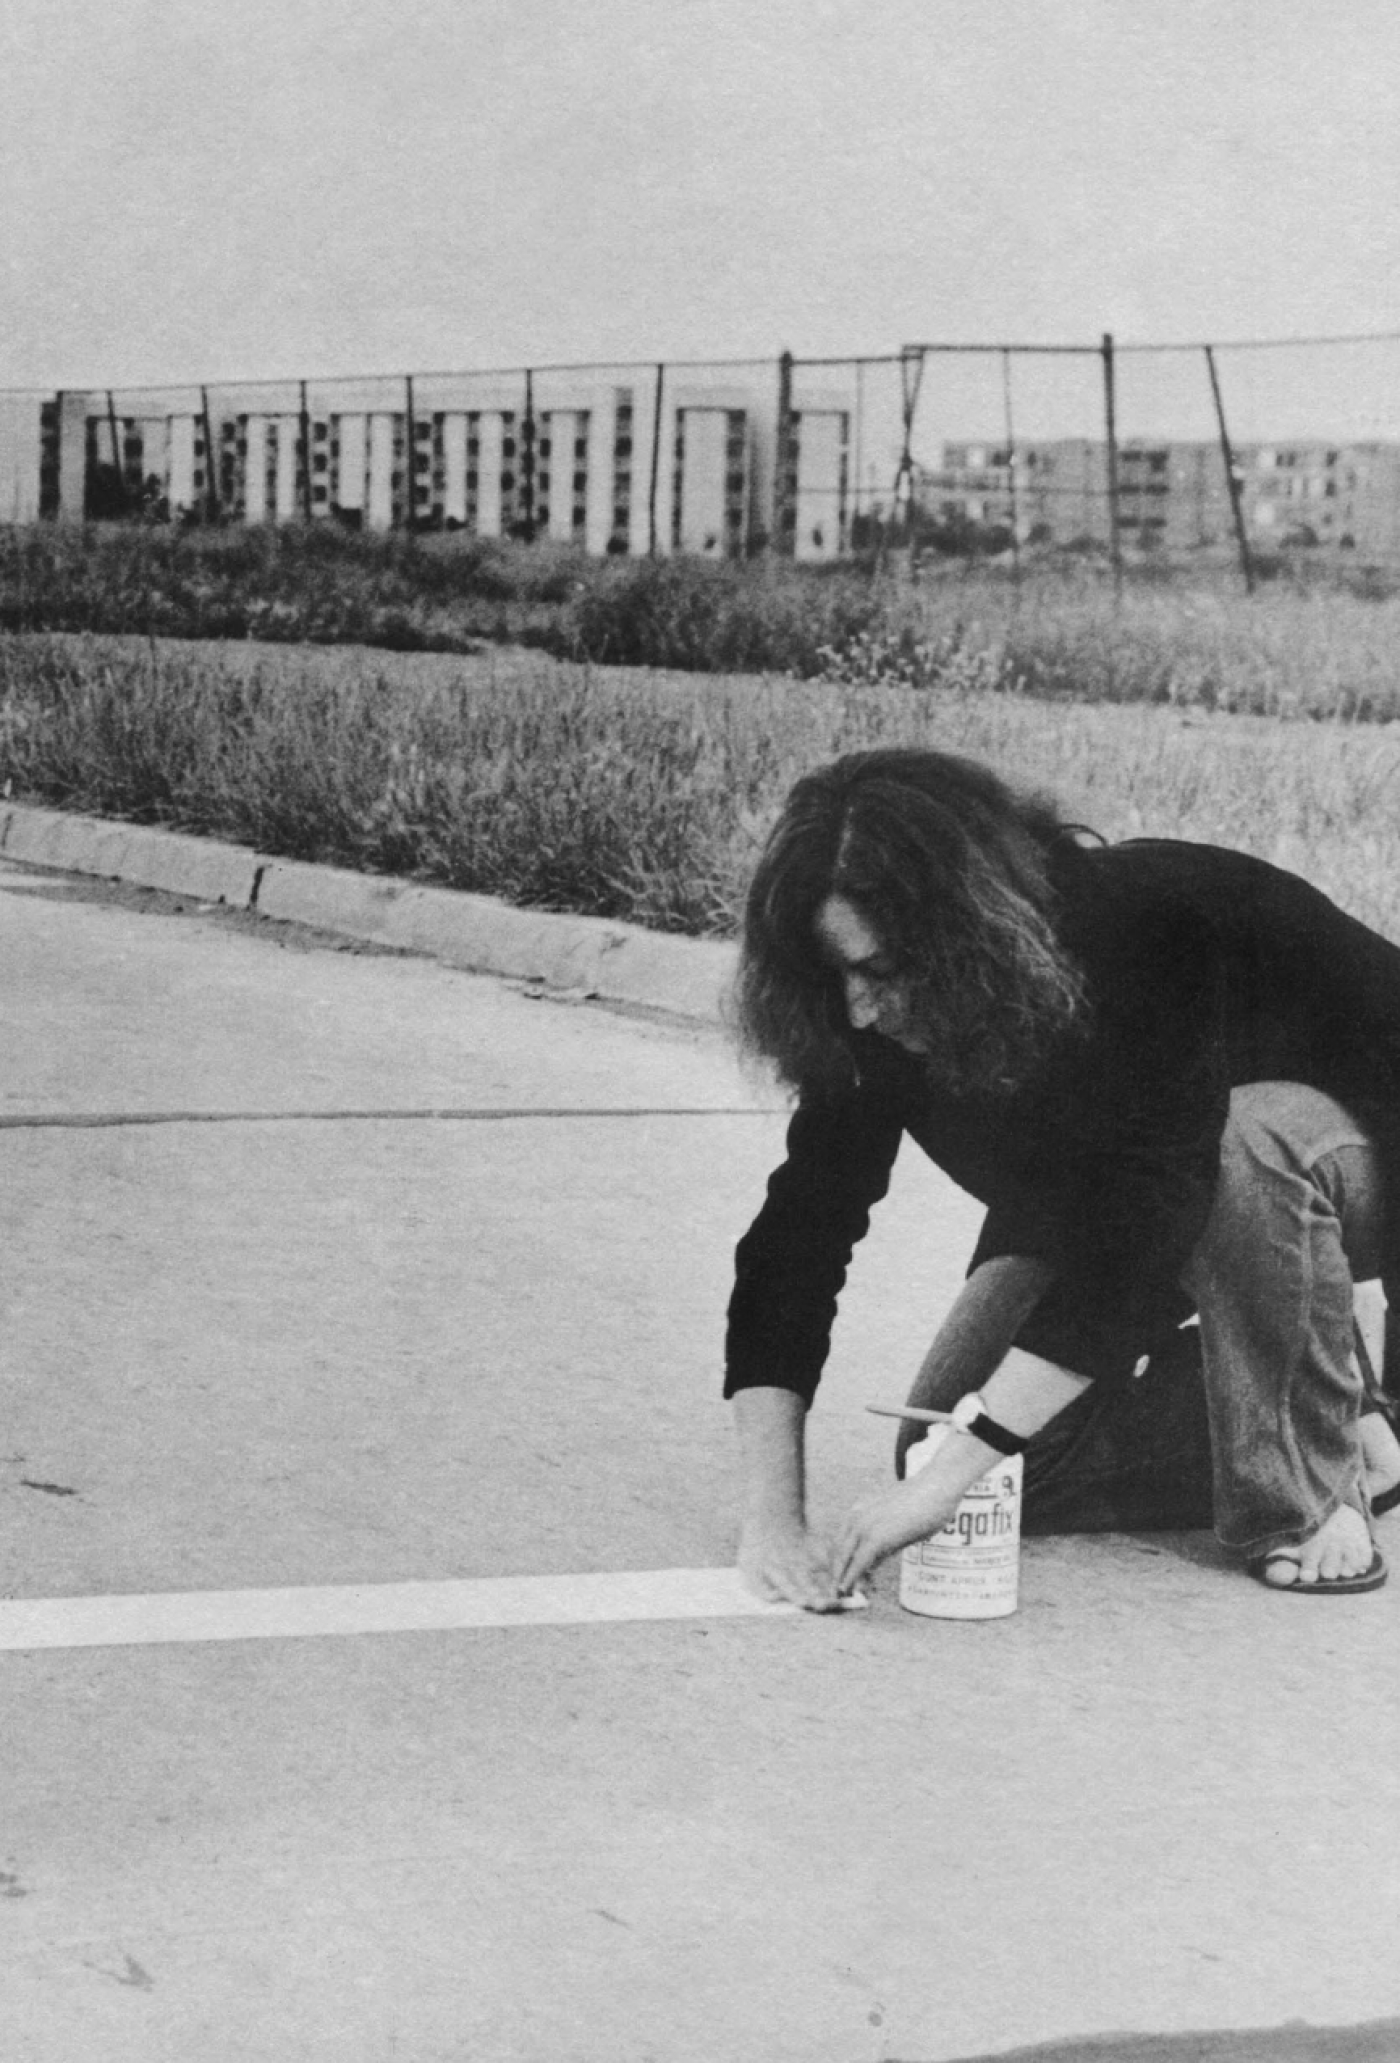 Black and white photograph of a woman painting a white line on a sidewalk.